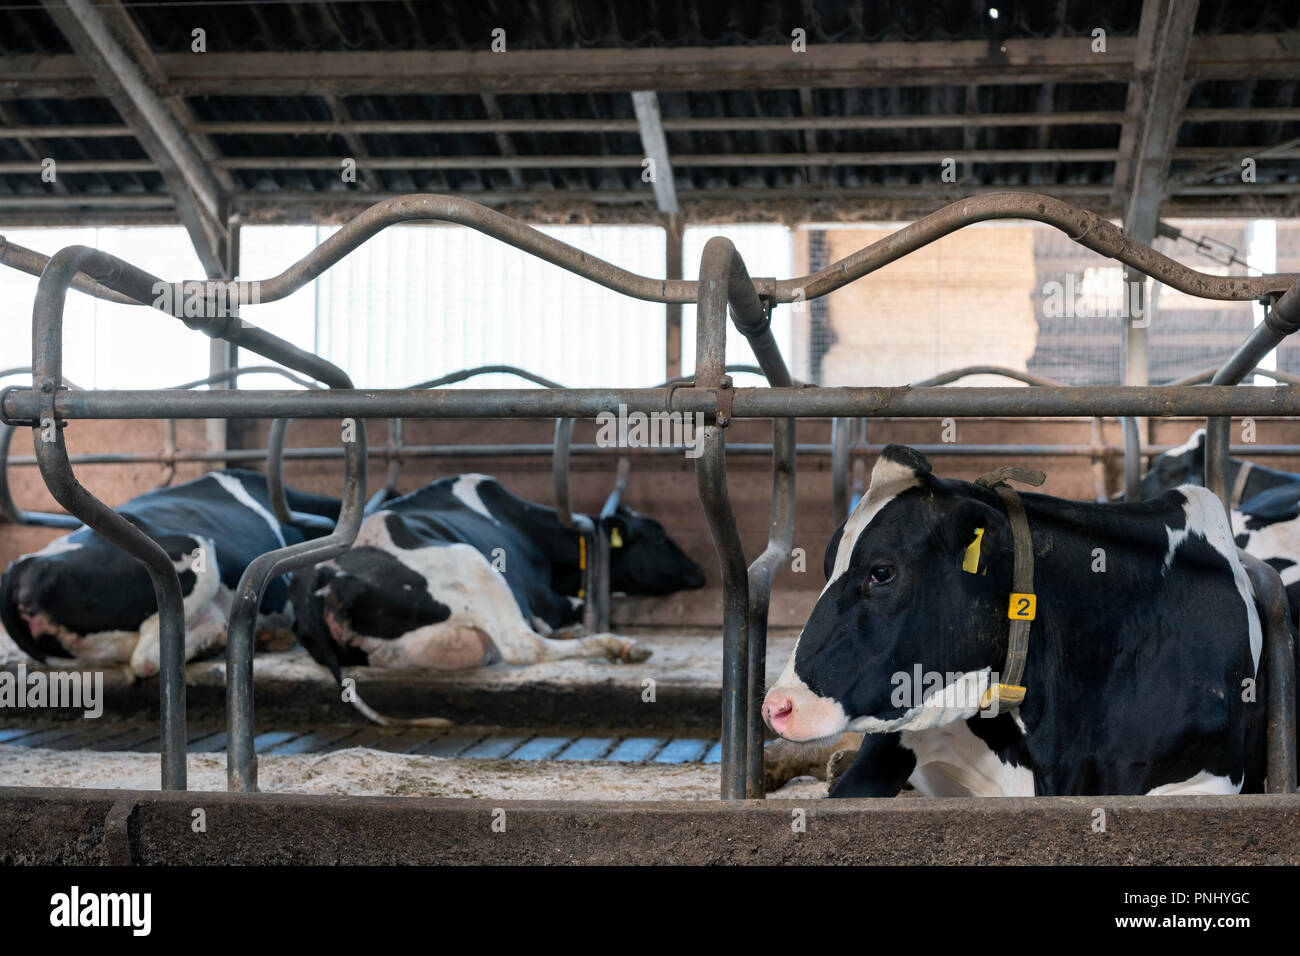 Black And White Spotted Holstein Cows Recline Inside Barn On Dutch Farm In The Netherlands Stock